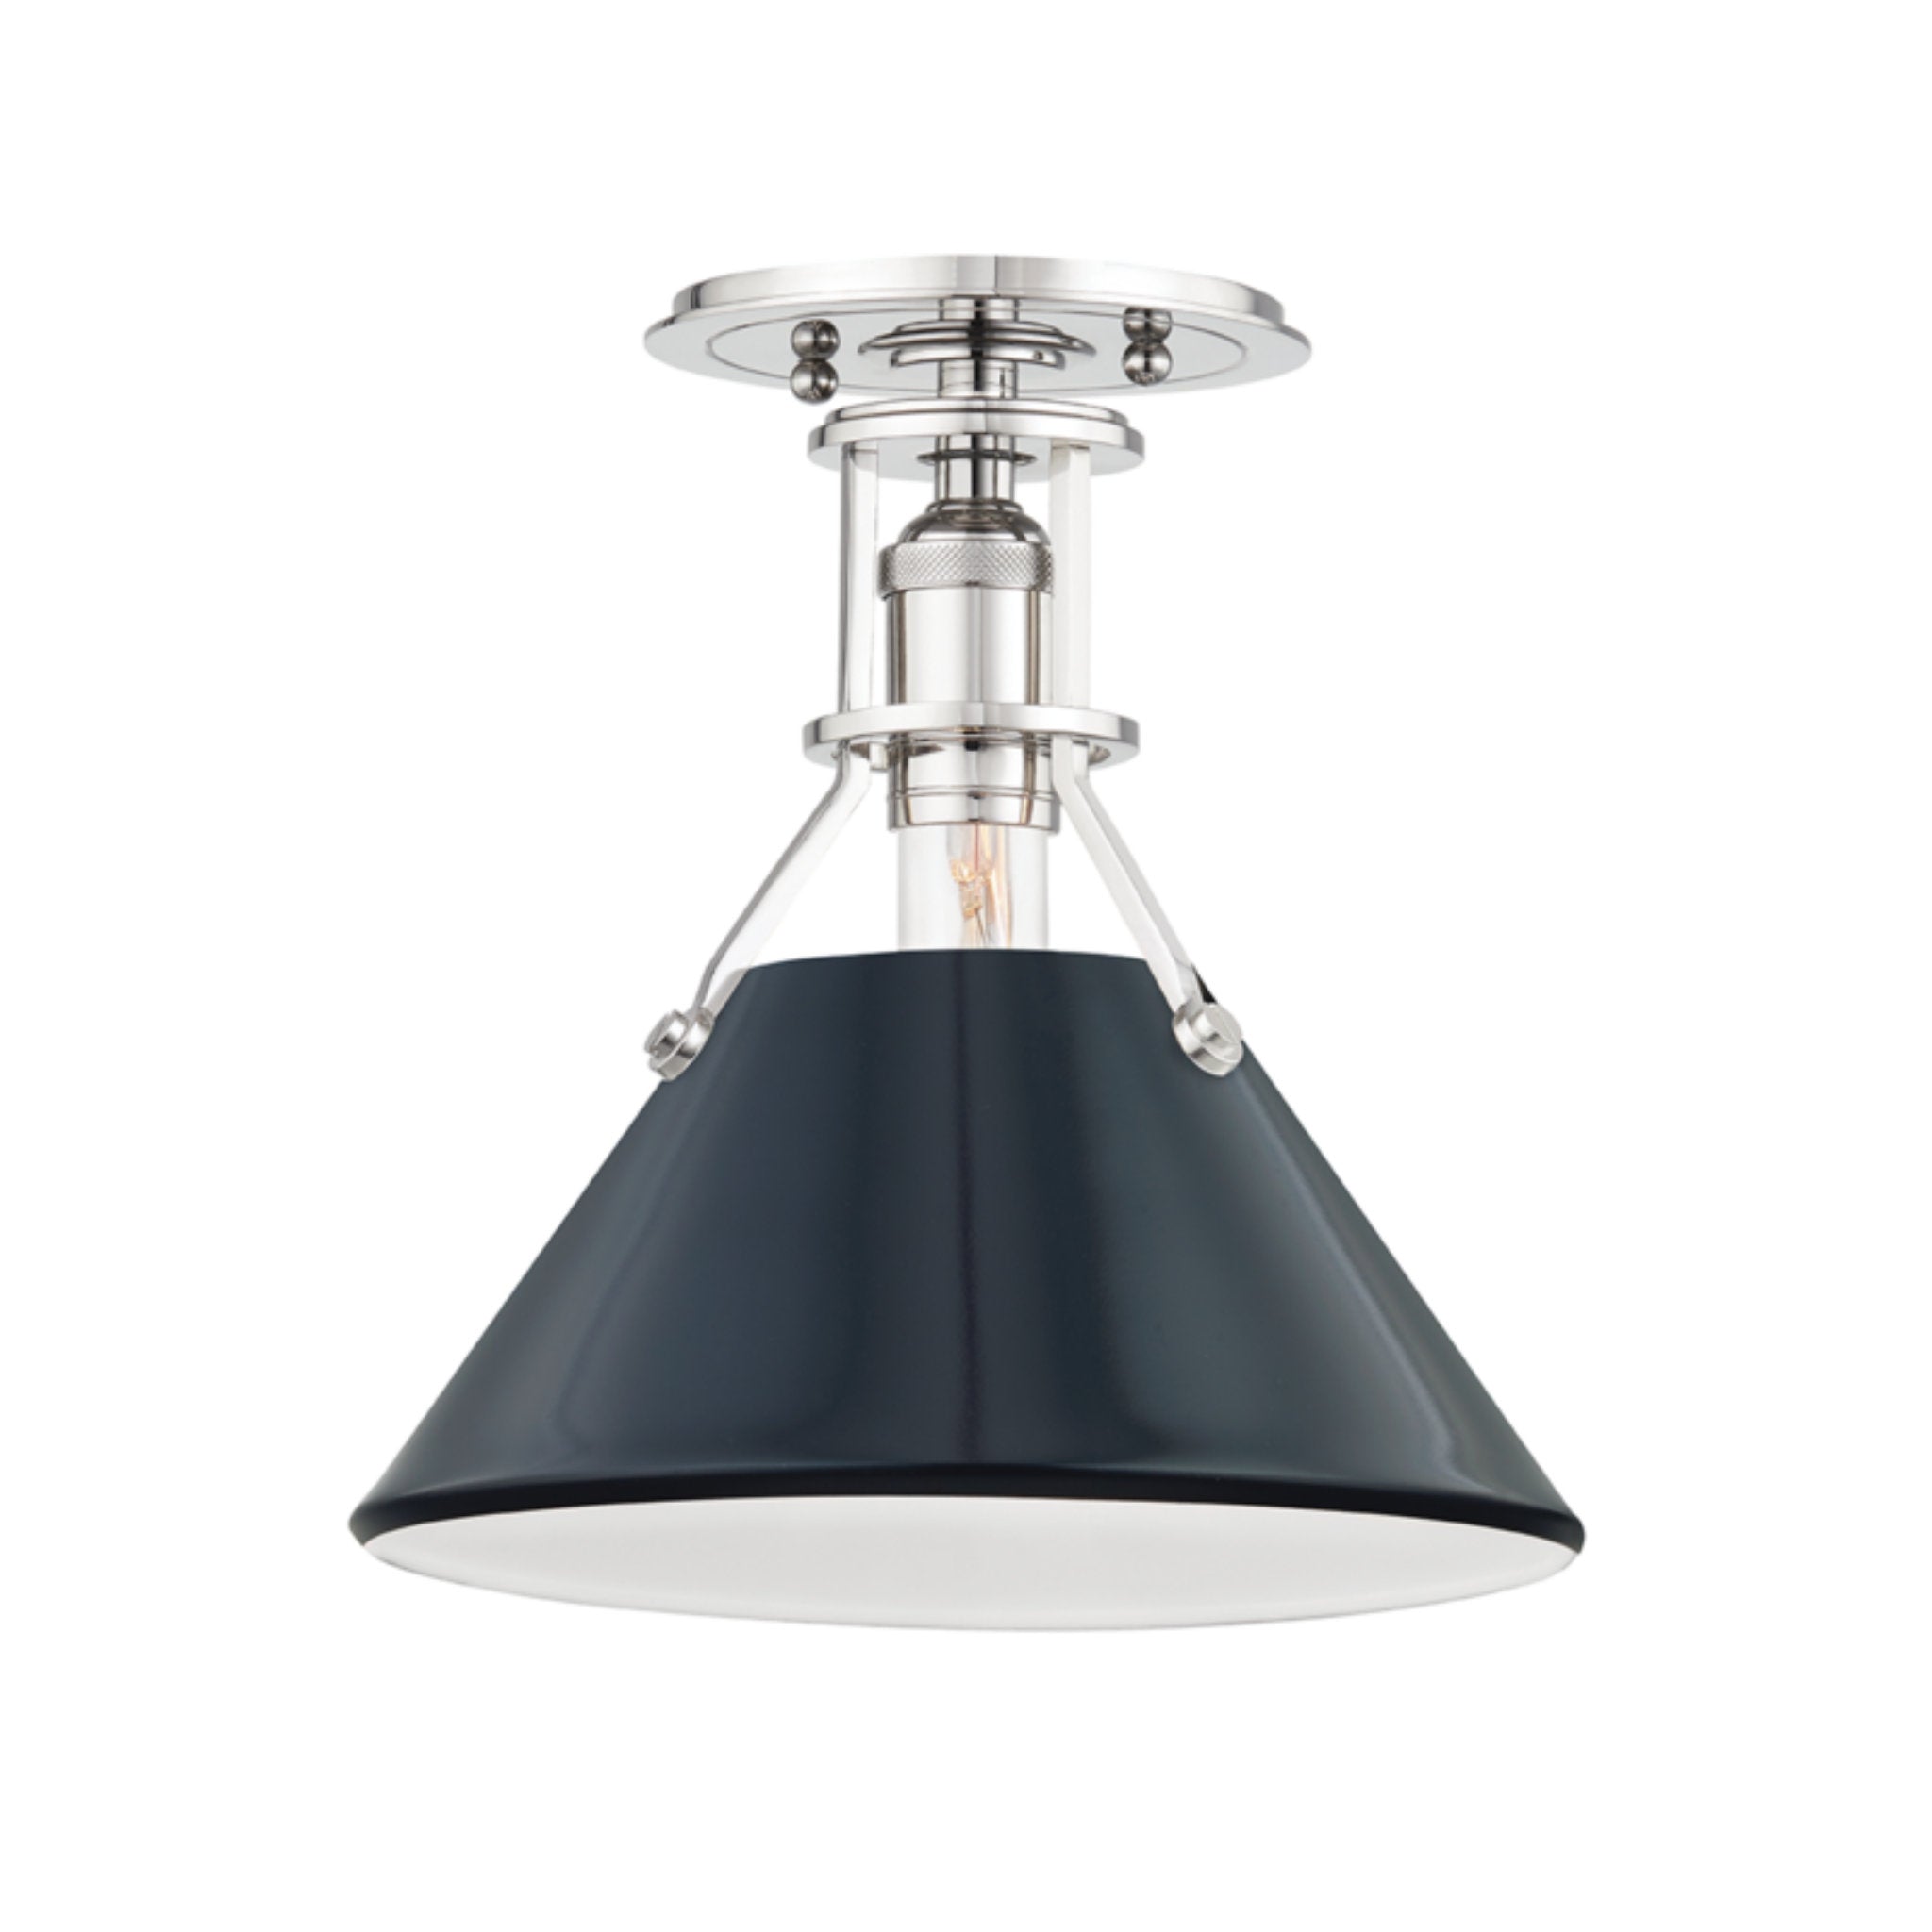 Painted No.2 1 Light Semi Flush in Polished Nickel/darkest Blue by Mark D. Sikes